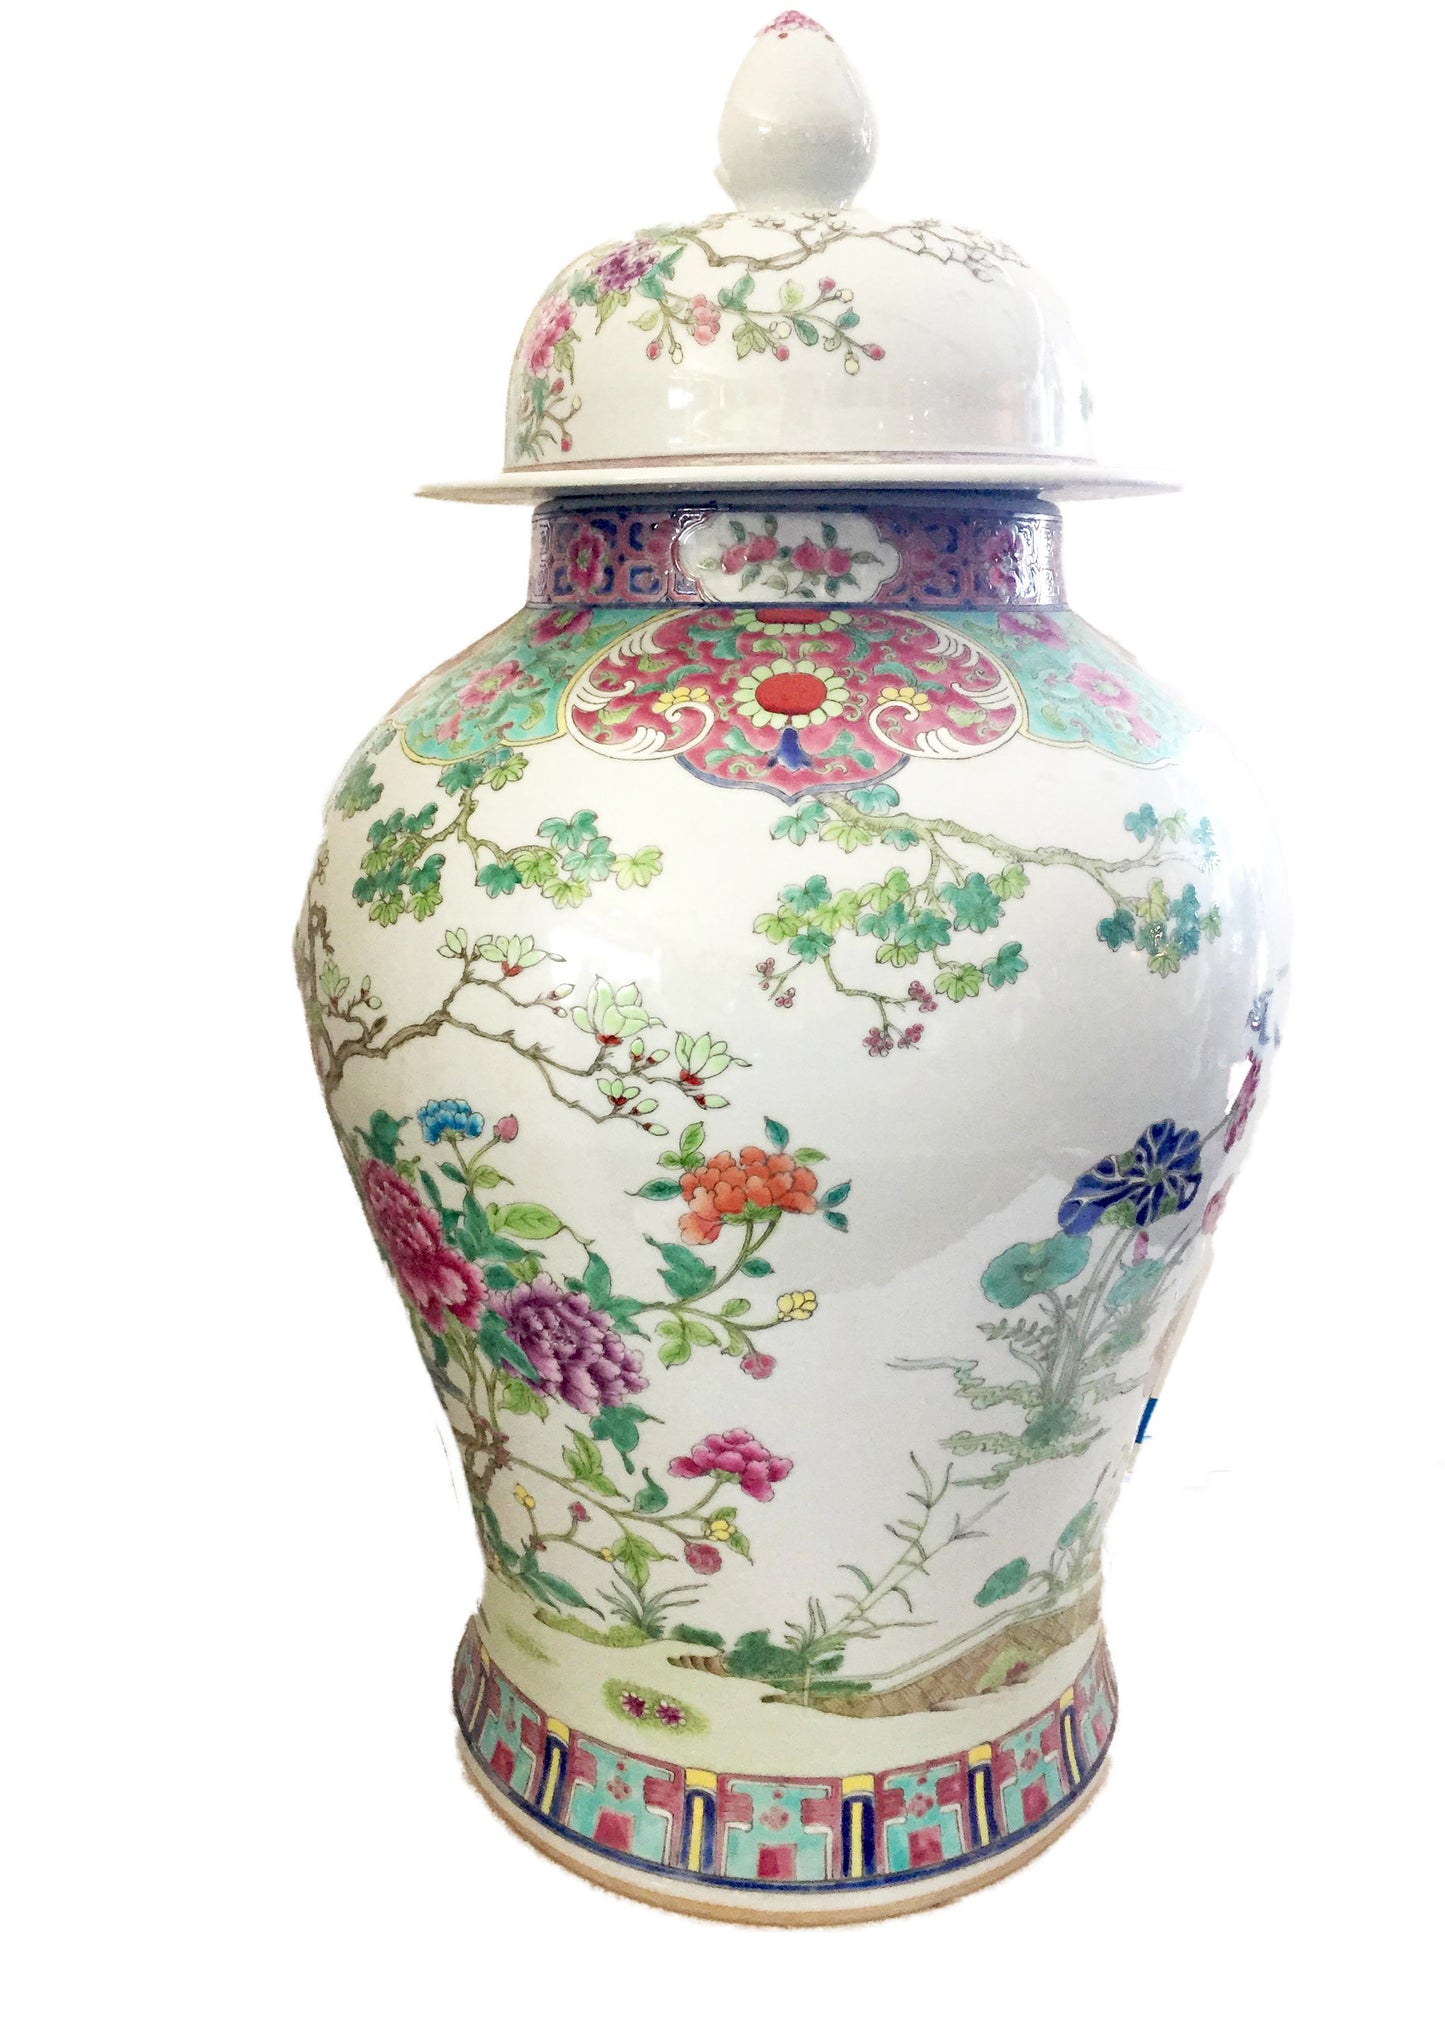 #1869 LG Chinese H Painted Porcelain  Famille Rose Ginger Jar w/ Phoenix  26" H